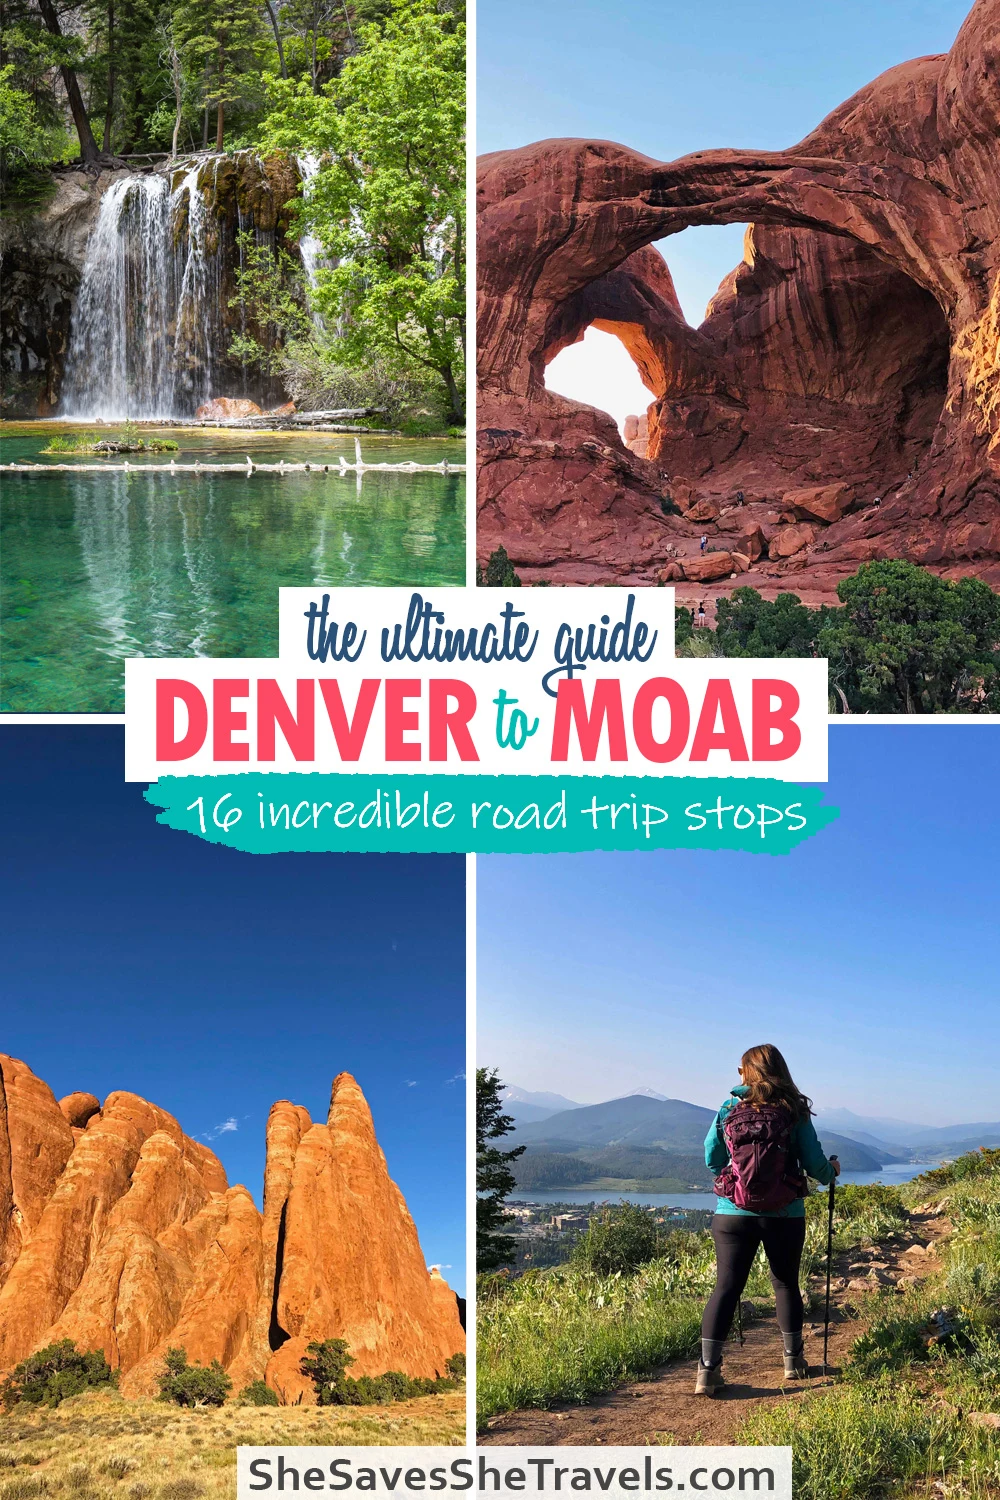 the ultimate guide denver to moab 16 incredible road trip stops